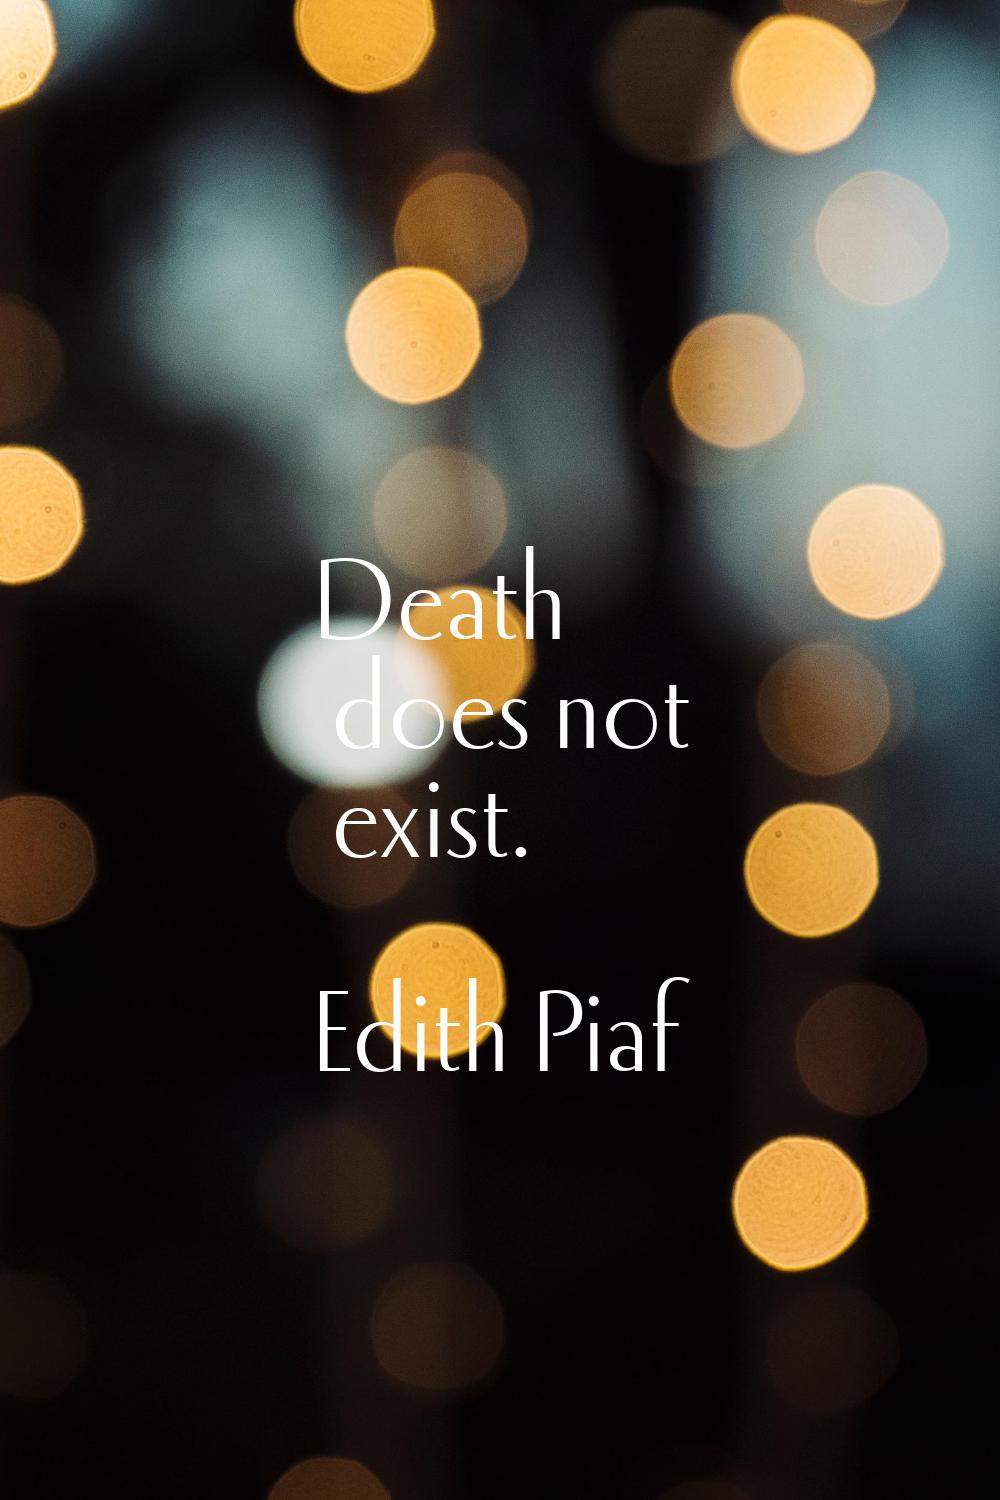 Death does not exist.